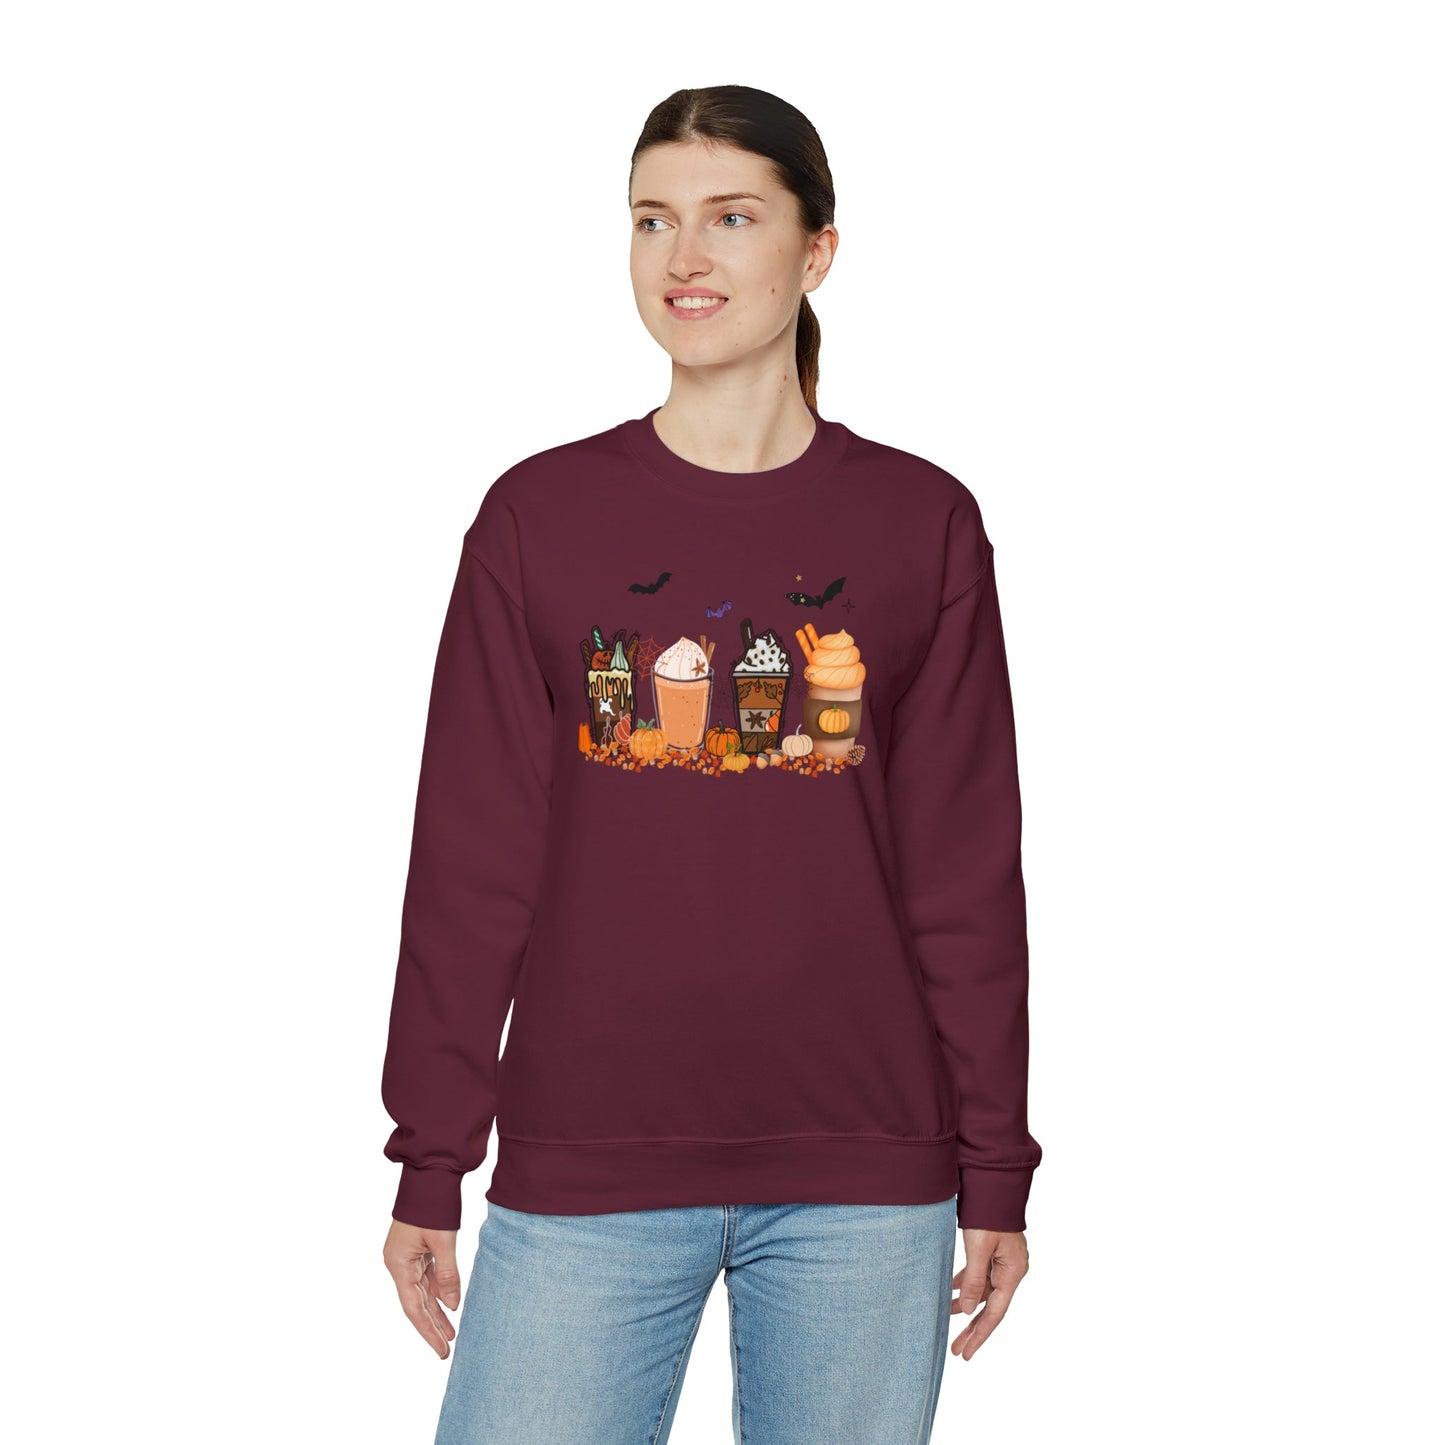 Get trendy with Festive and Spooky Coffee Heavy Blend™ Crewneck Sweatshirt - Sweatshirt available at Good Gift Company. Grab yours for $25.95 today!